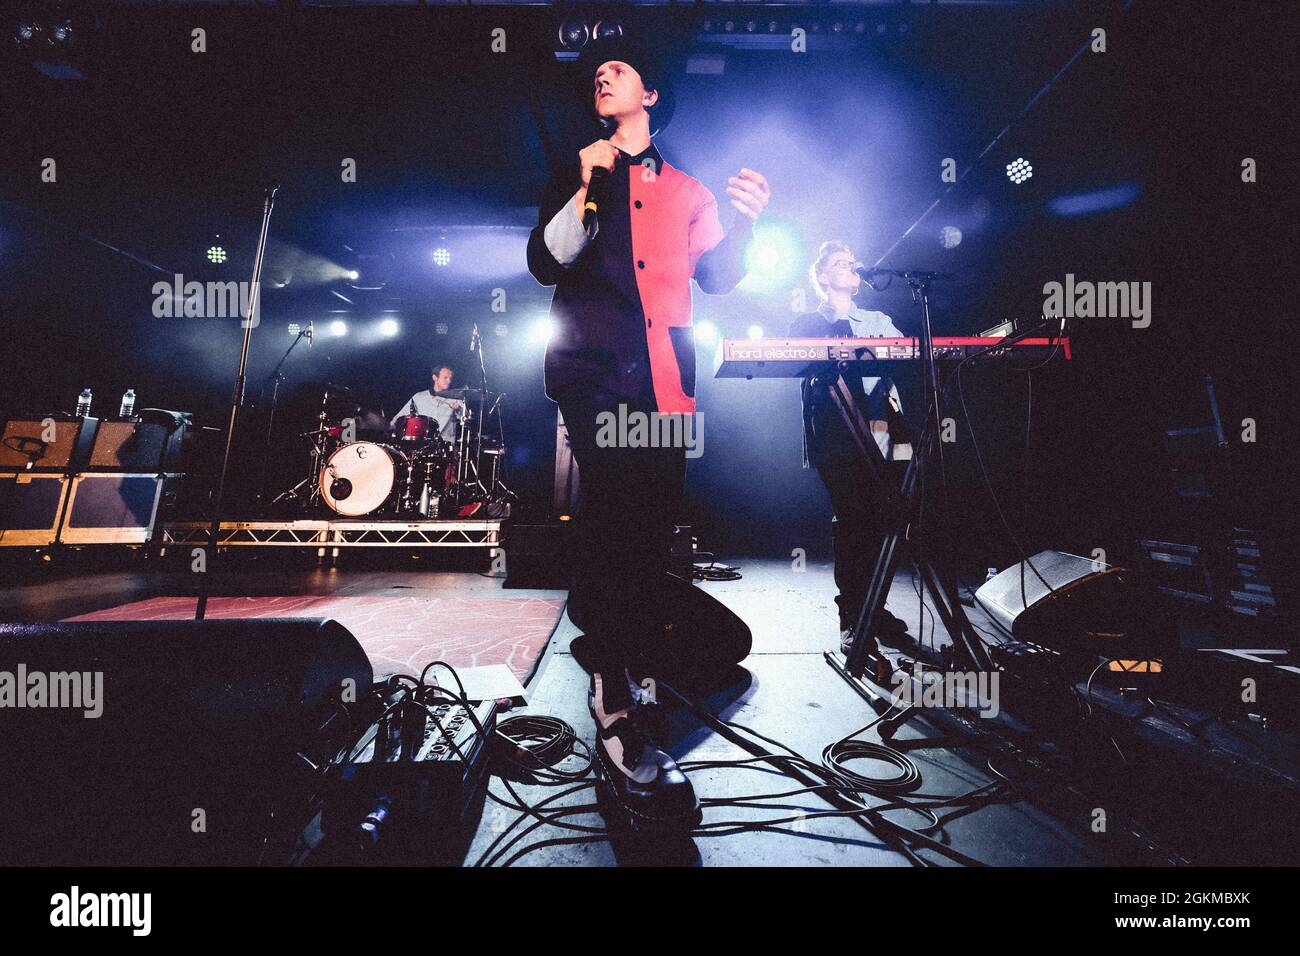 Newcastle, UK - 14.09.21: Maximo Park perform onstage at Newcastle University Students Union. The band performed their most recent album, Nature Always Wins, and second album Our Earthly Pleasures, in full. Photo Credit: Thomas Jackson / Alamy Live News. Stock Photo